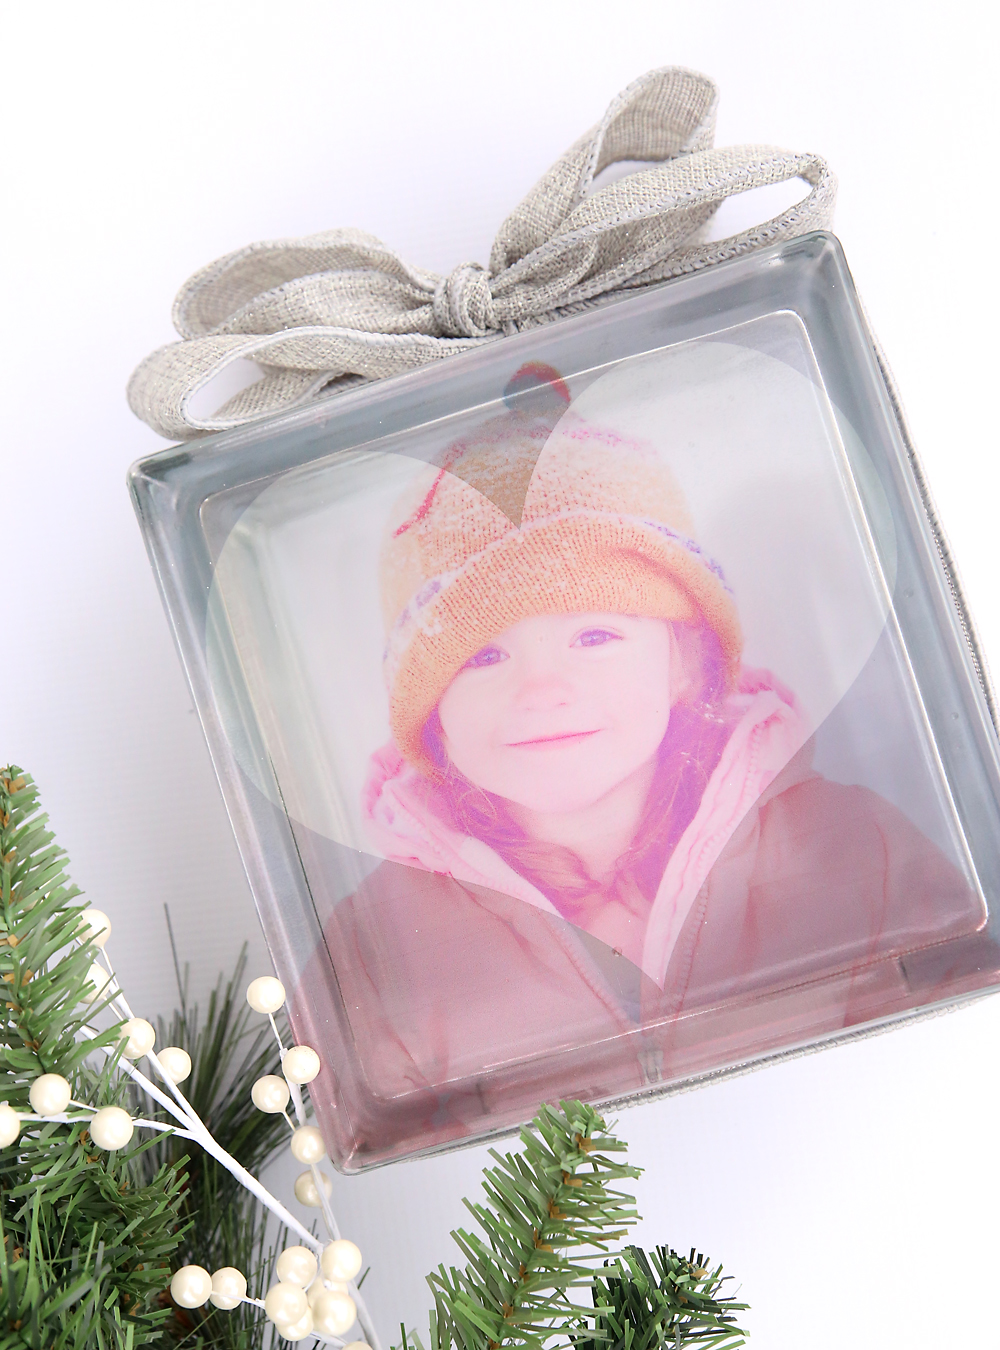 Super easy way to make your own glass pictures! Glass photo block DIY tutorial.